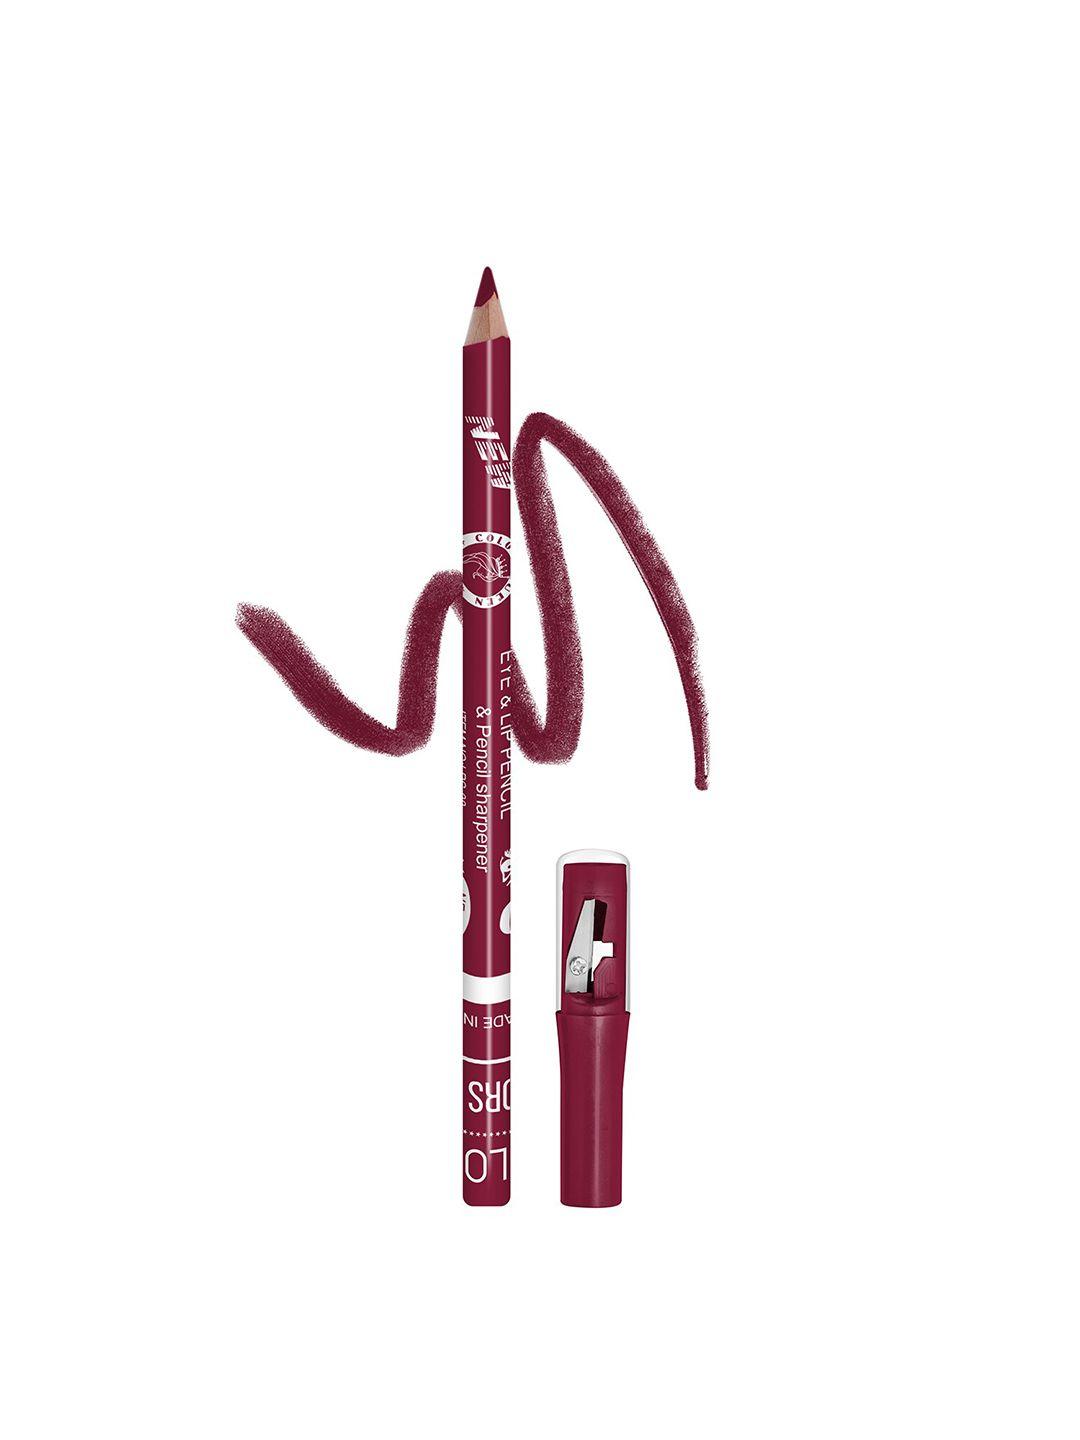 colors queen long lasting eye & lip liner pencil with sharpener 0.3 g - plum 14